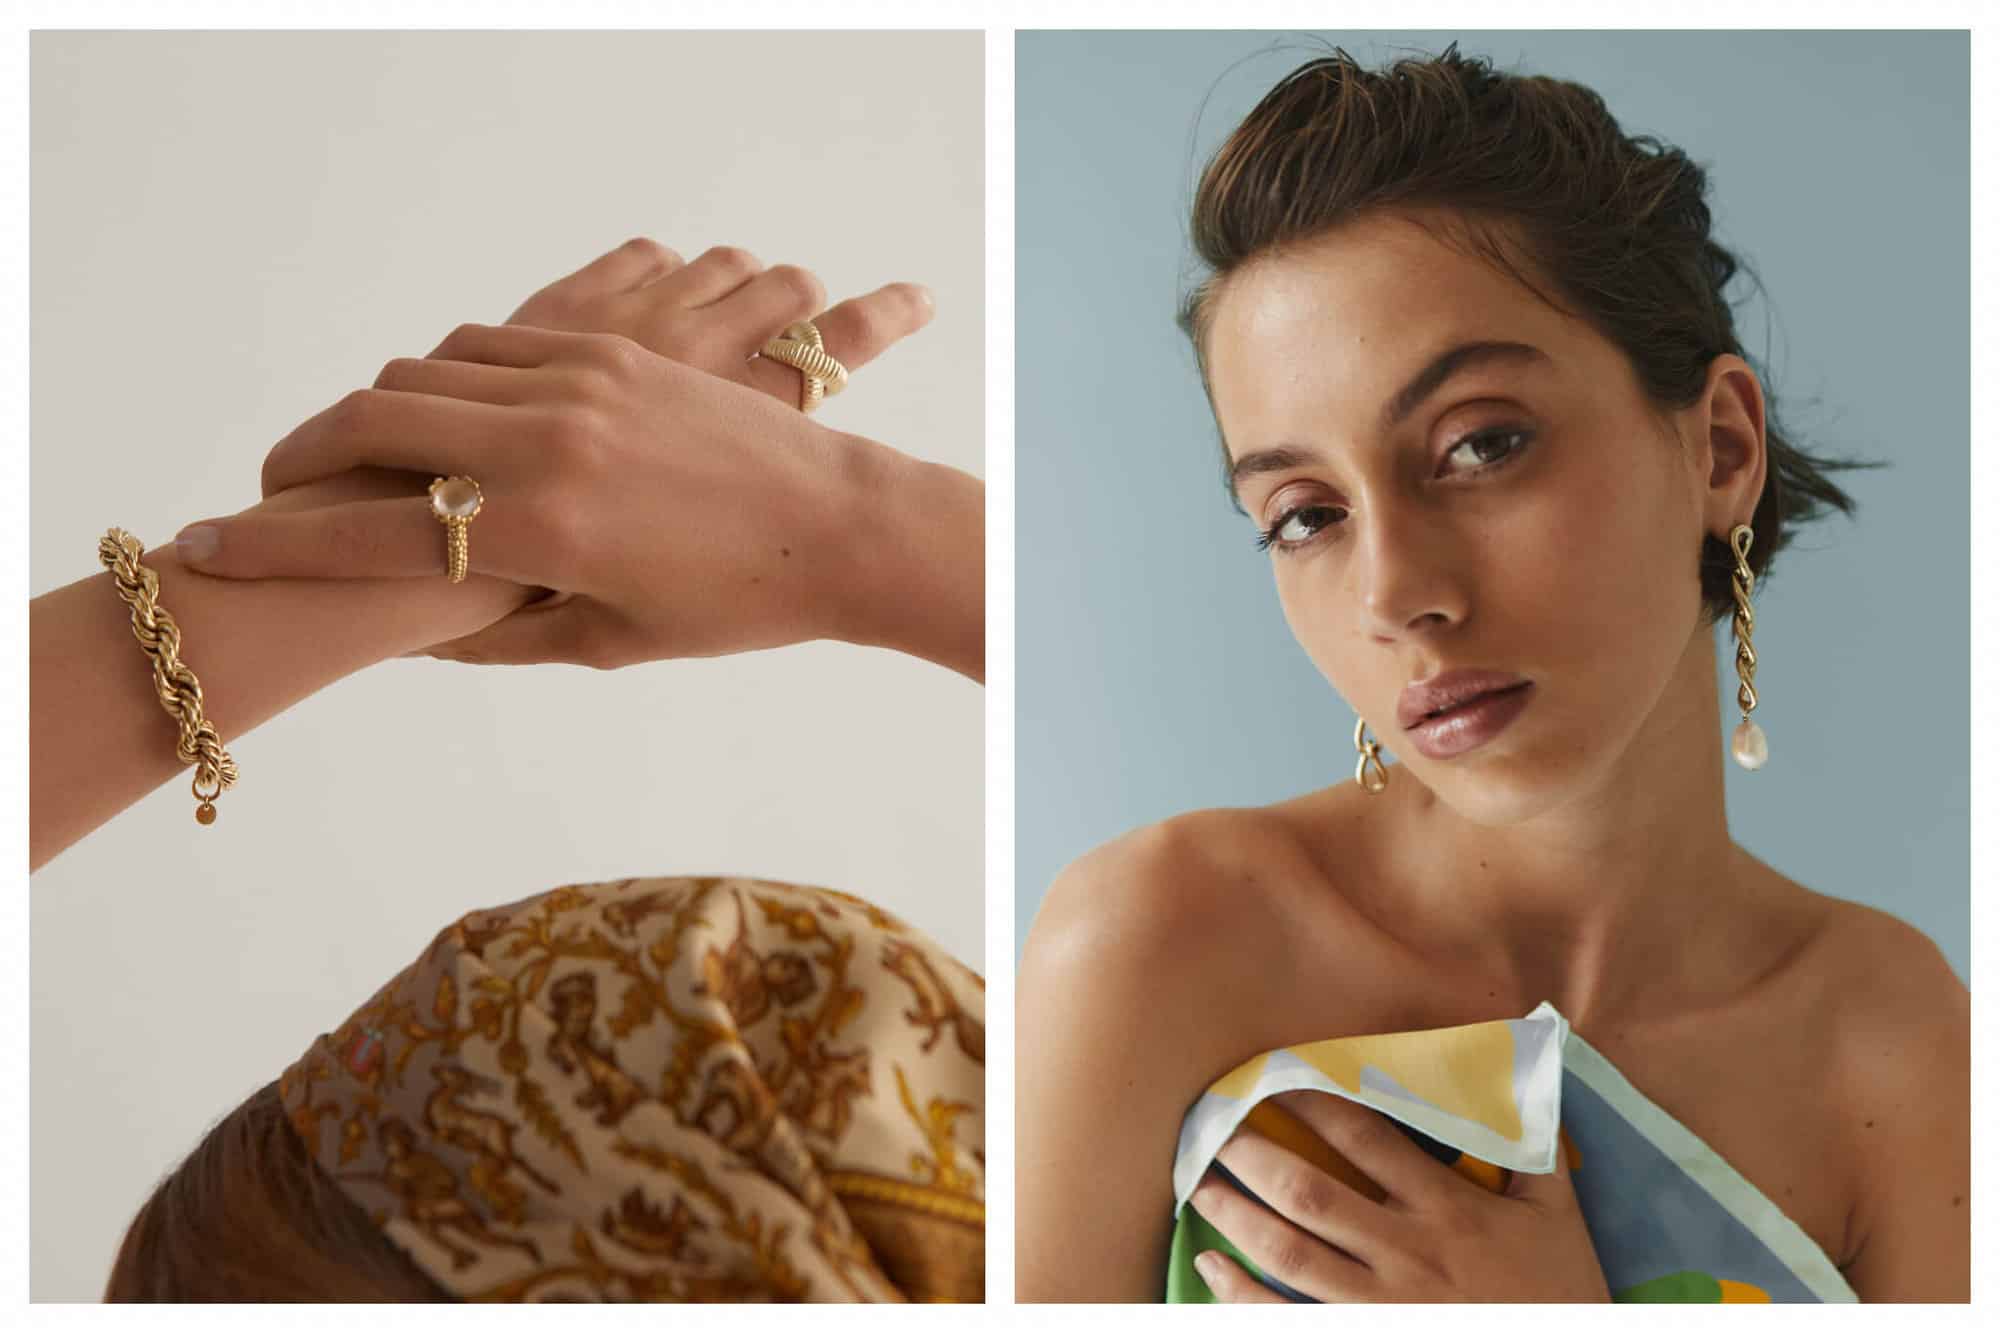 Left: a woman holding her hands above her head wearing a gold bracelet and two rings by Bonanza plus a headscarf. Right: a brunette woman with her hair done up holding a scarf up against her chest wearing gold and pearl drop earrings from Bonanza.